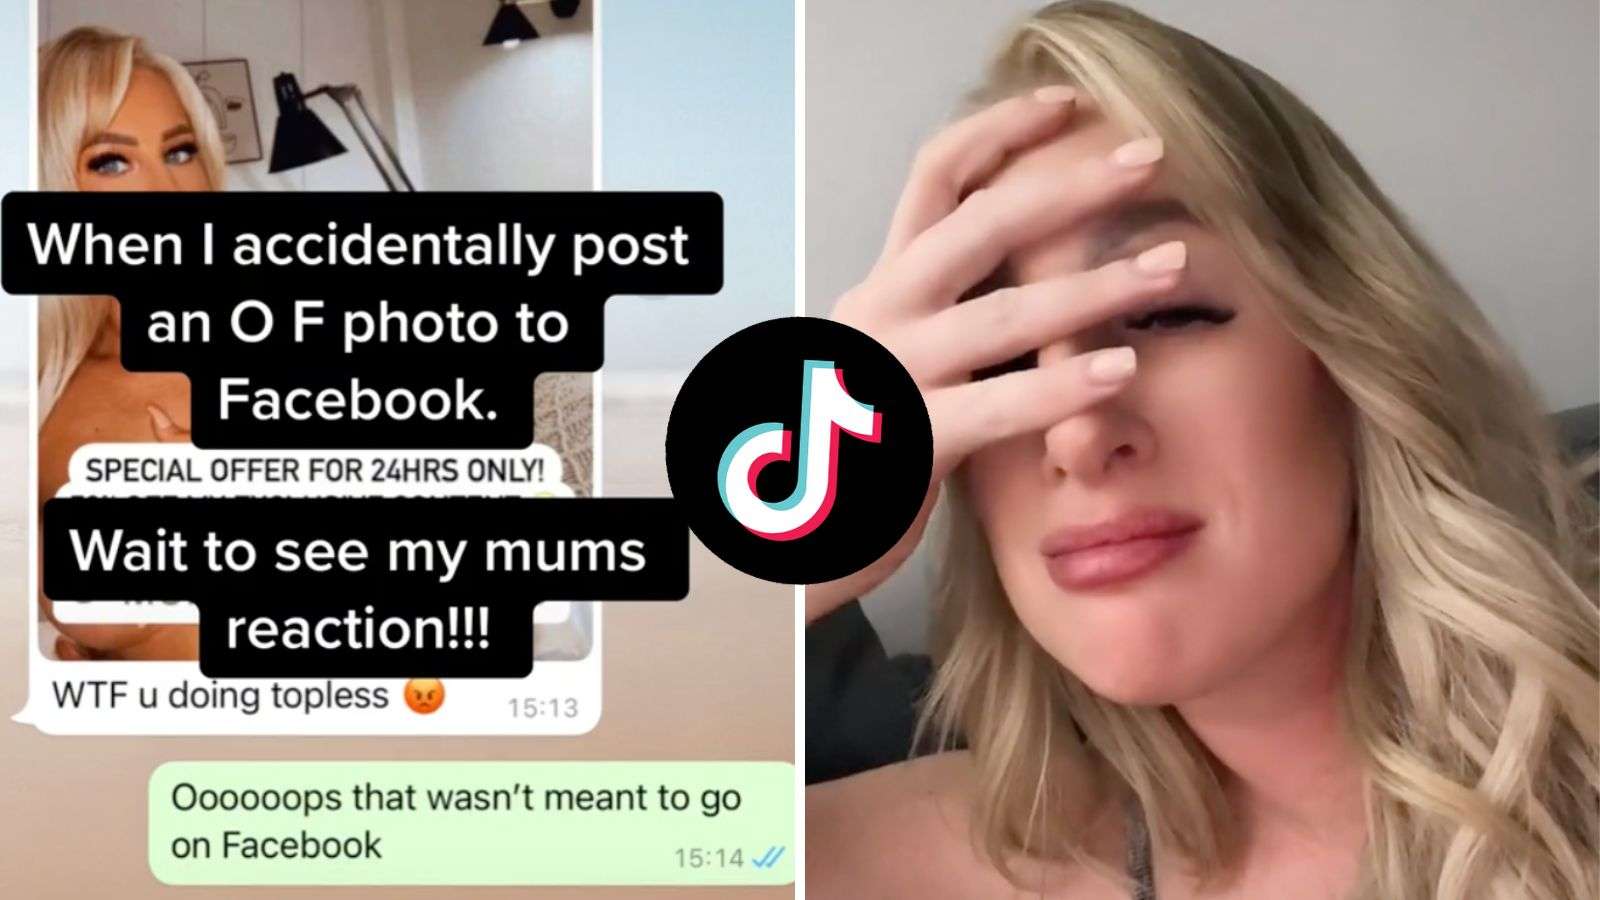 TikToker’s mom furious as daughter accidentally shares her OnlyFans photo on Facebook